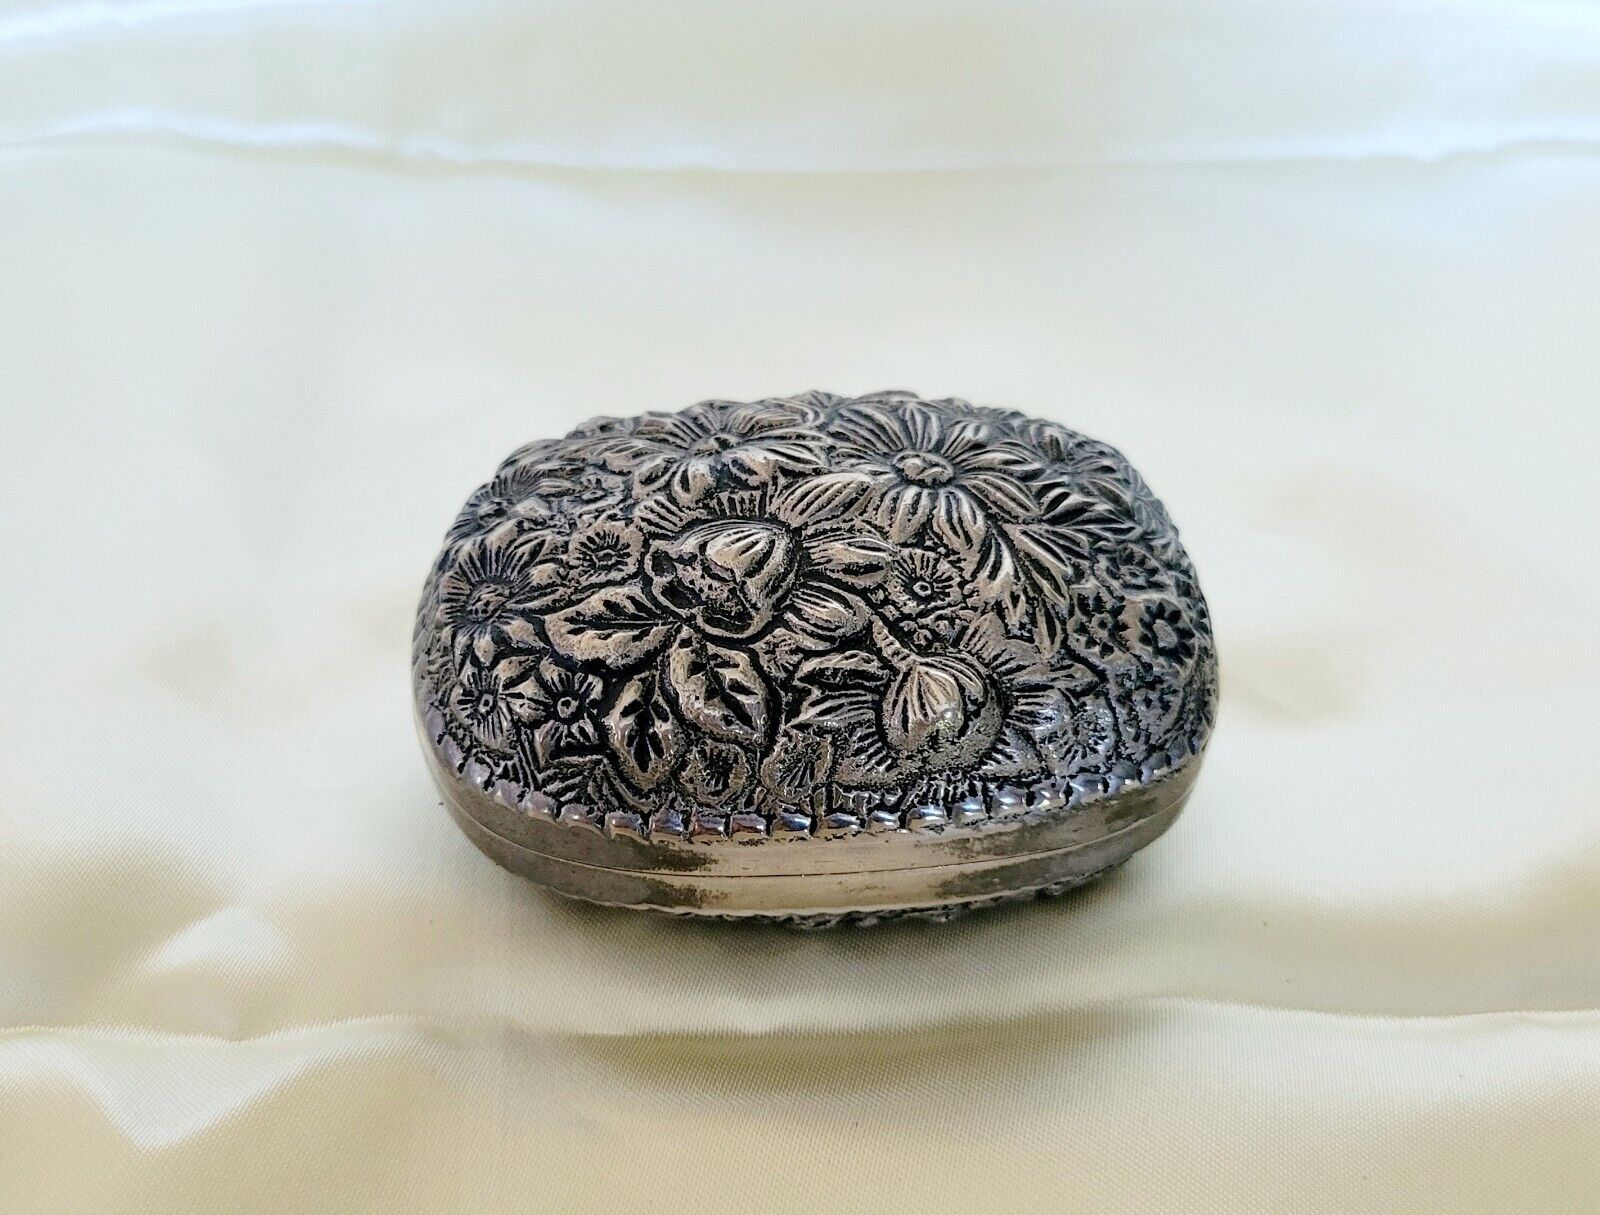 Vintage 1920's ANTIQUE Ornate Silver Plated Jewelry Box